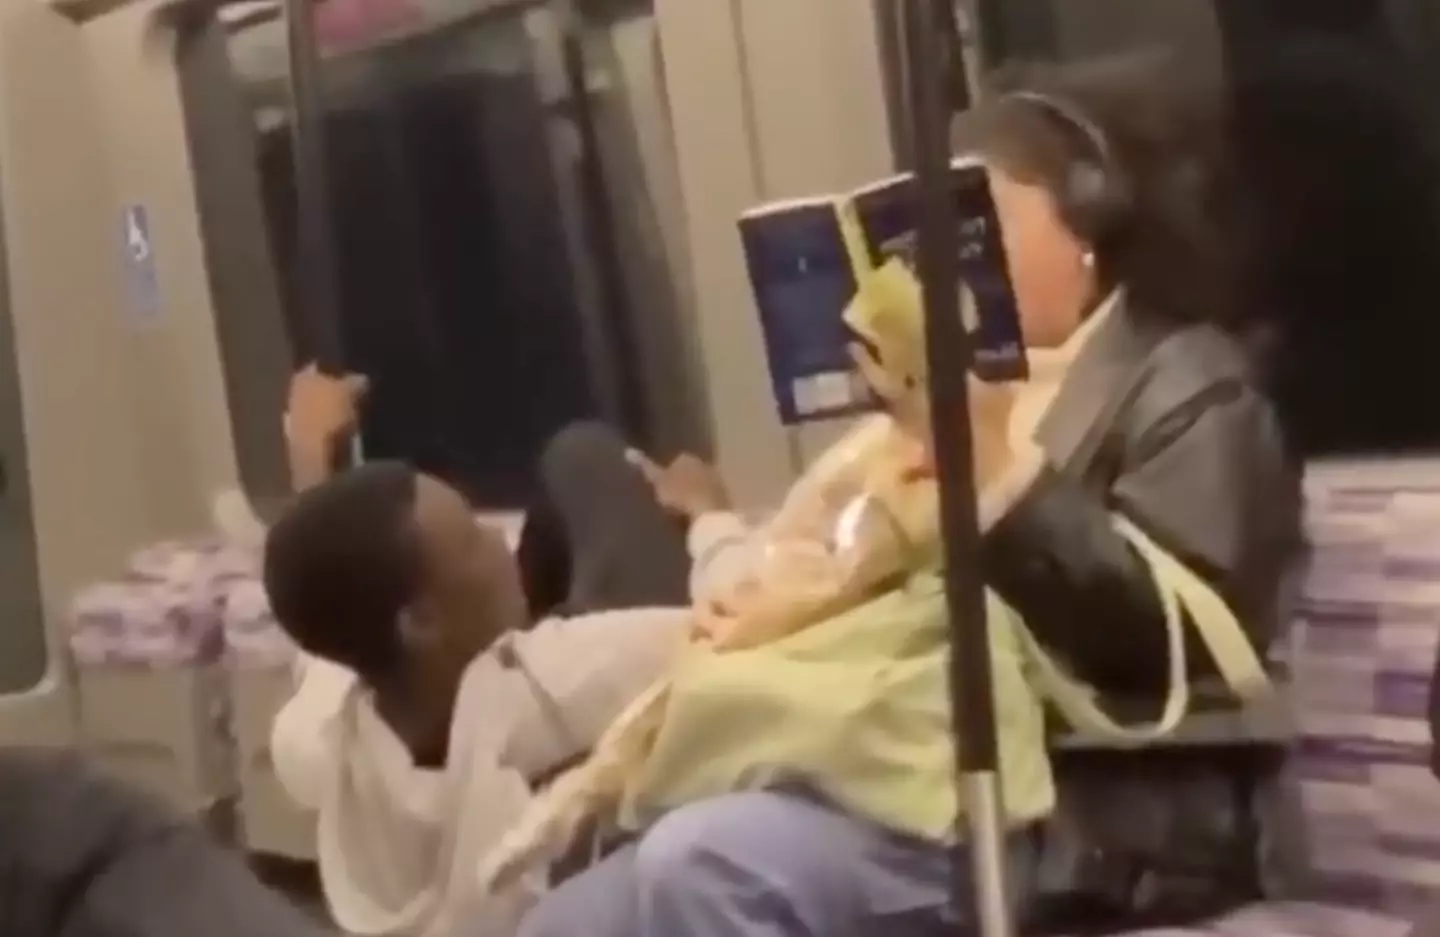 Another video shows the TikTok trying to speak to passengers on public transport.